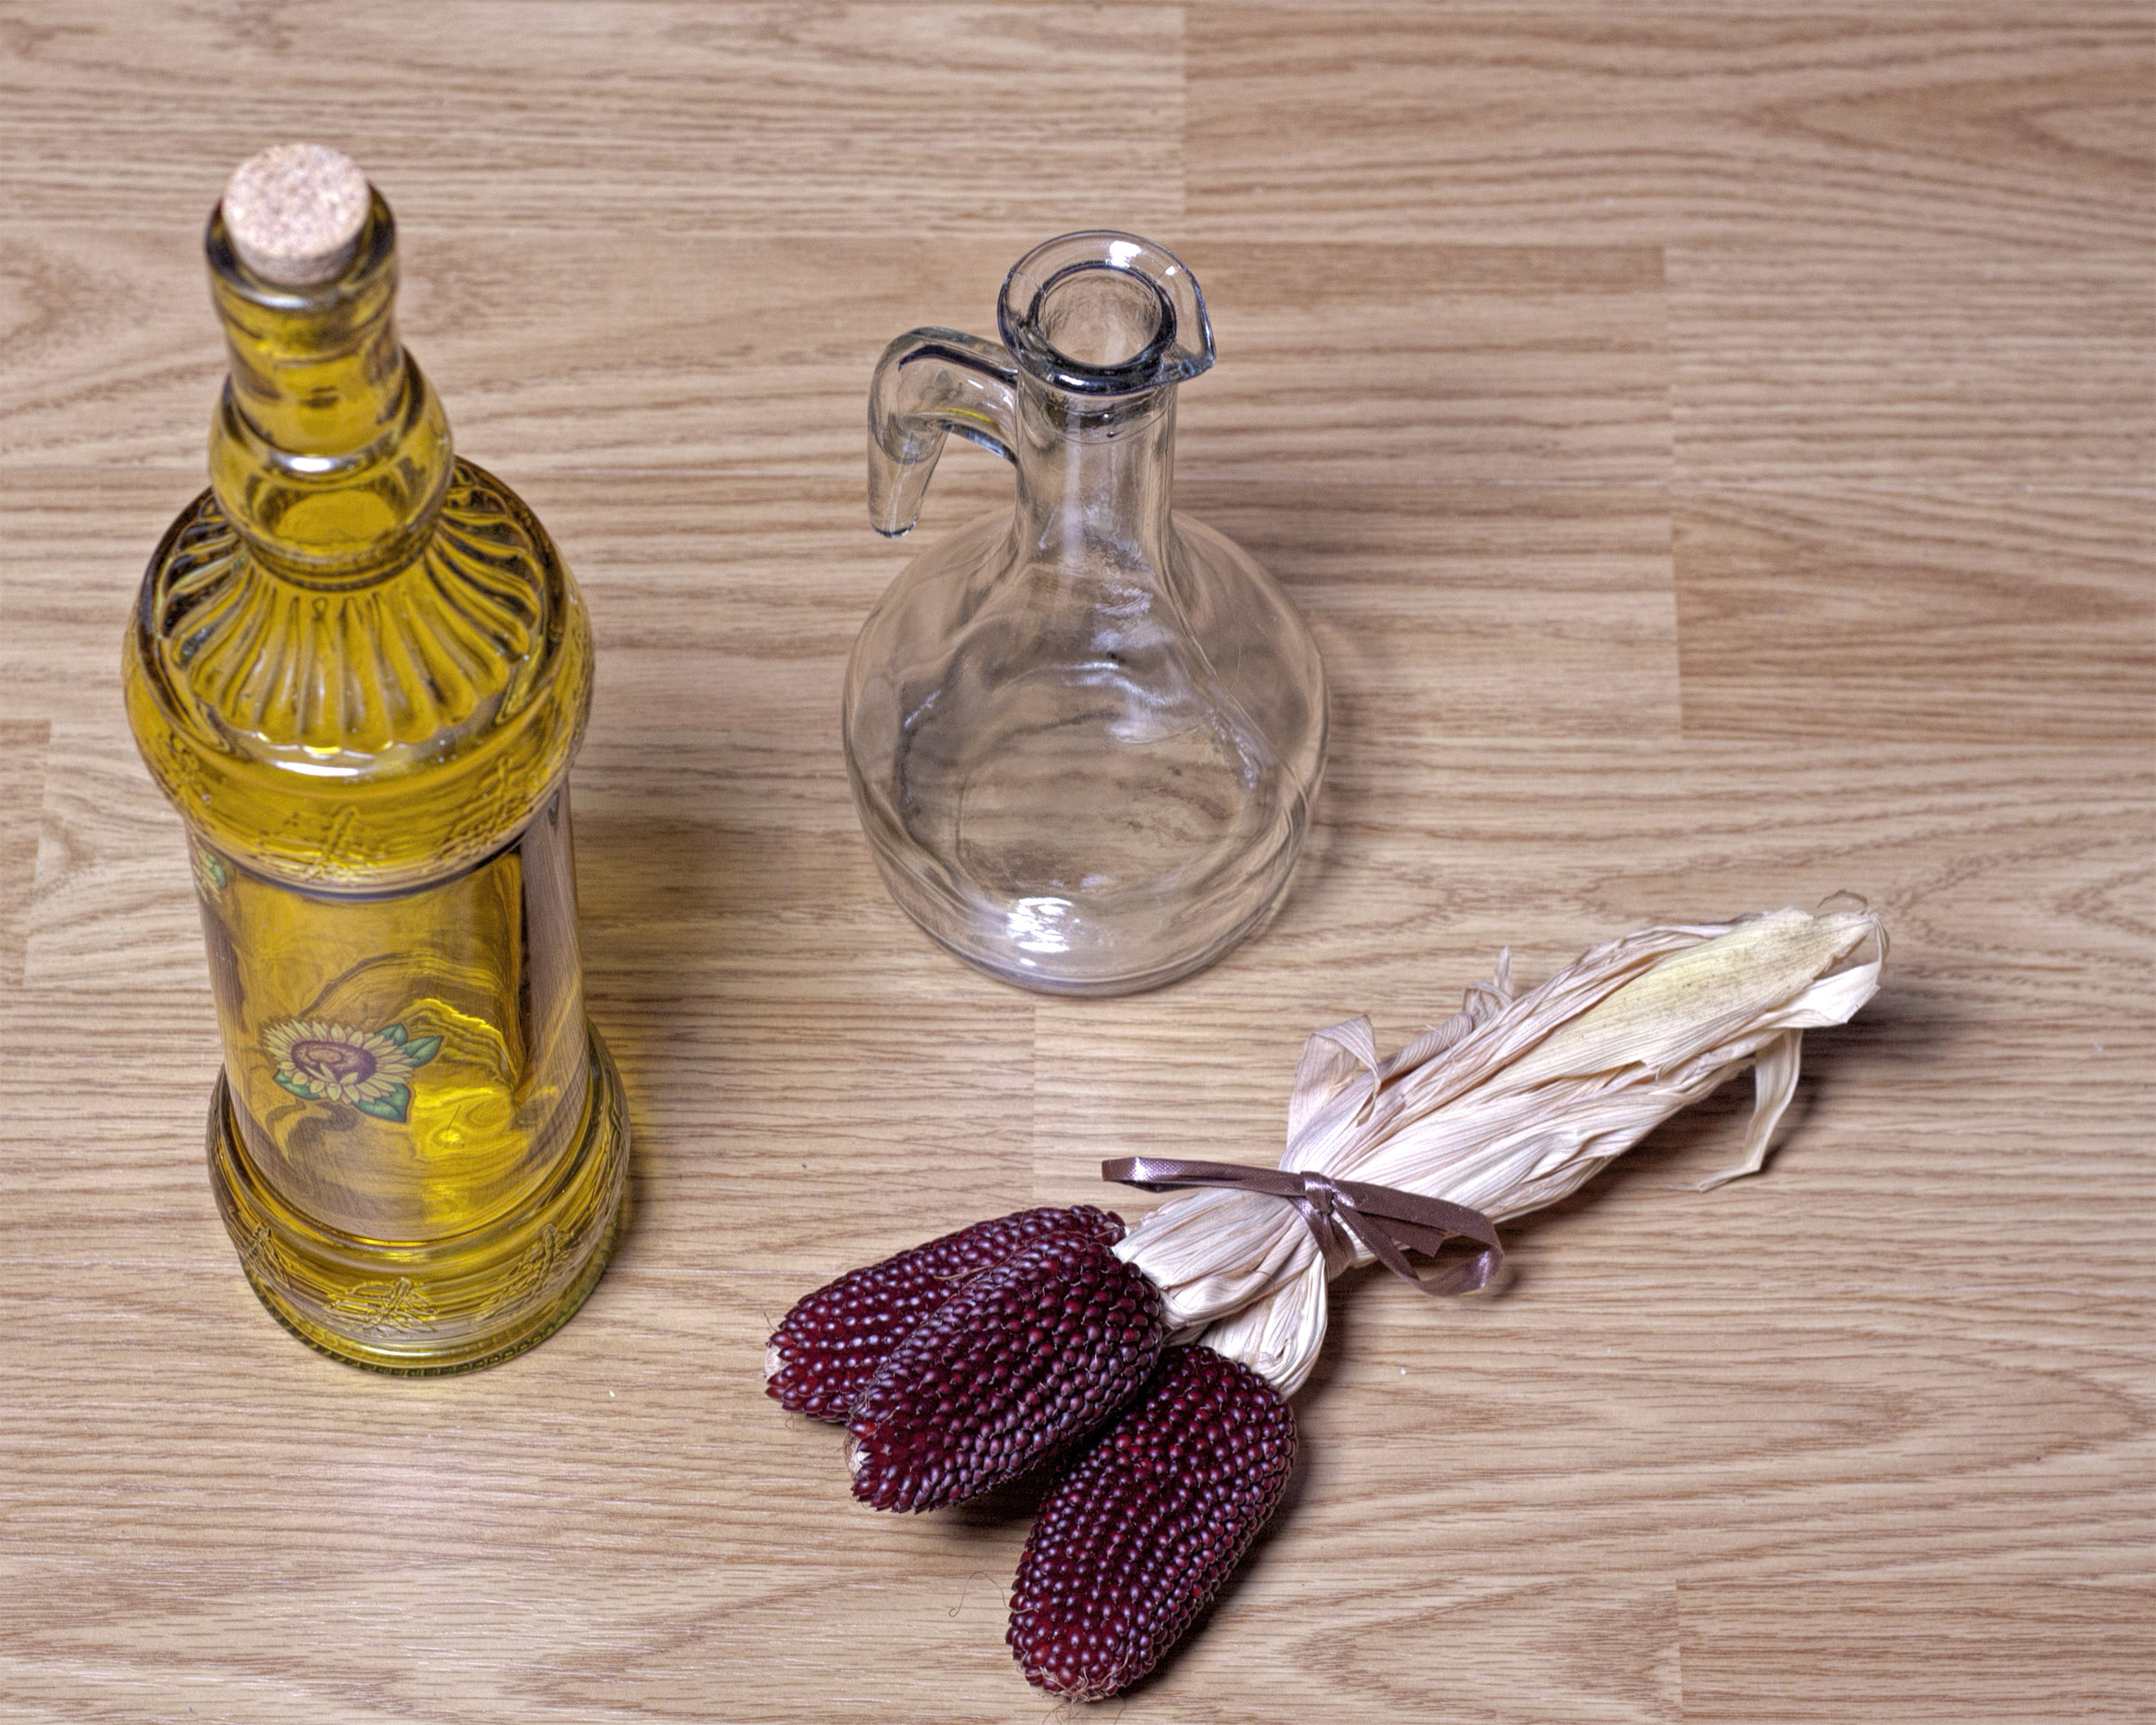 Corn and bottles, Autumn, Rustic, Wooden, Wood, HQ Photo